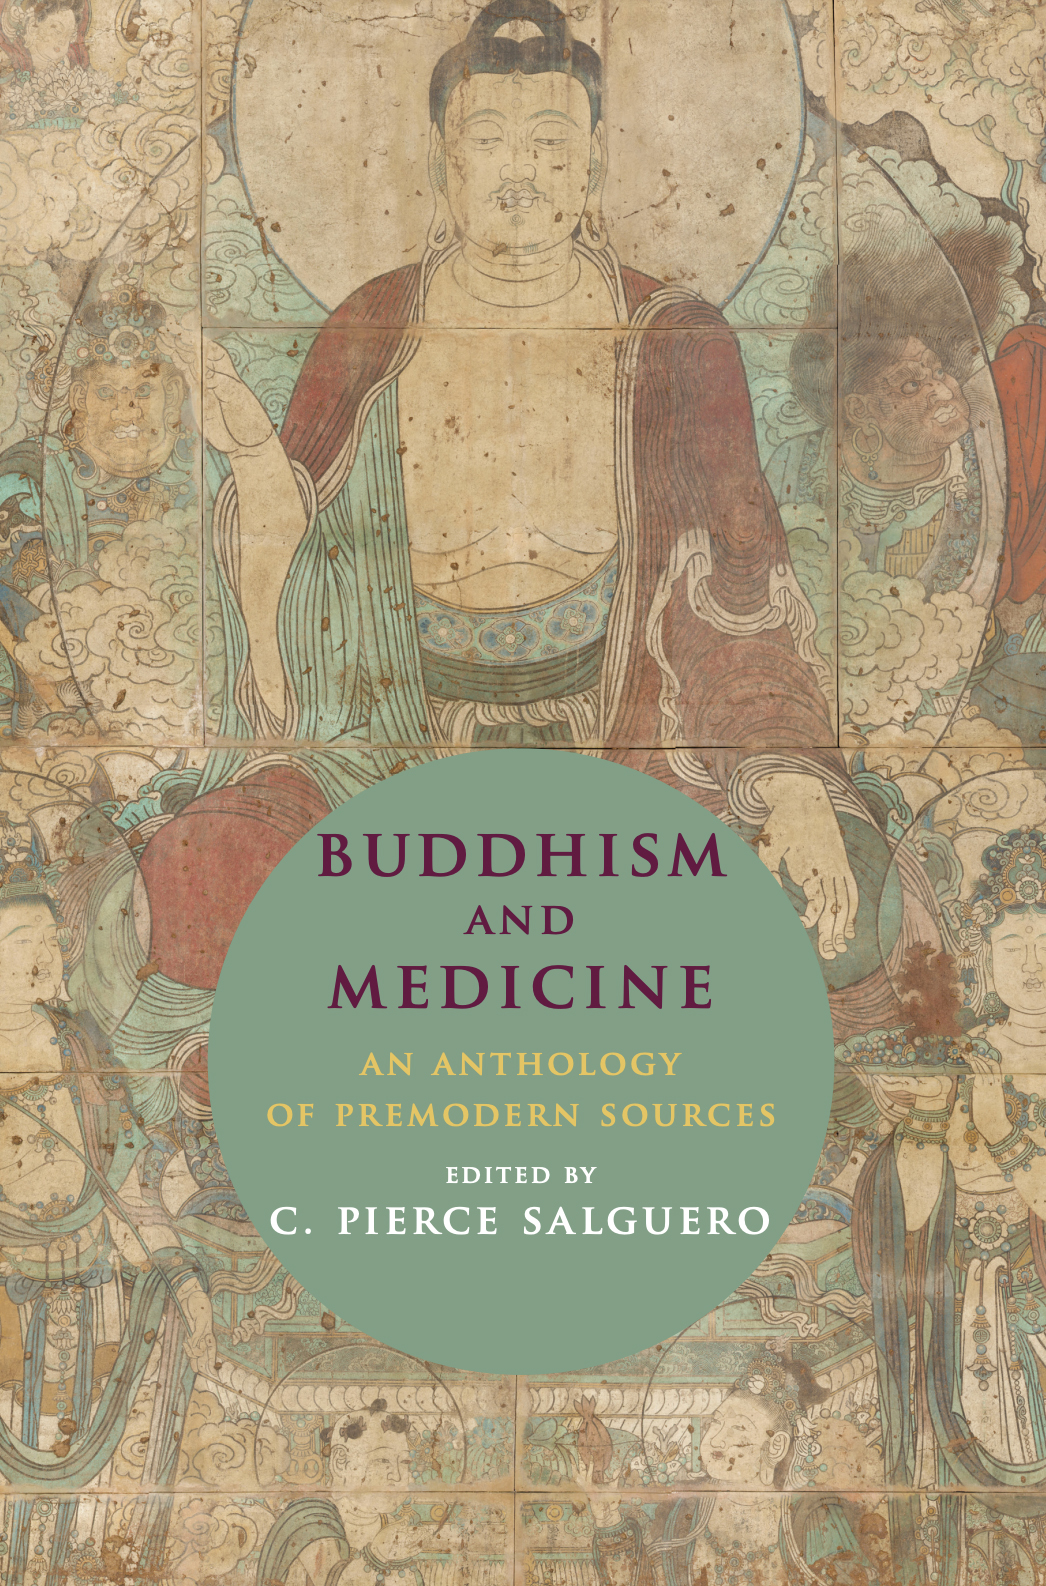 Buddhism and Medicine-front.jpg